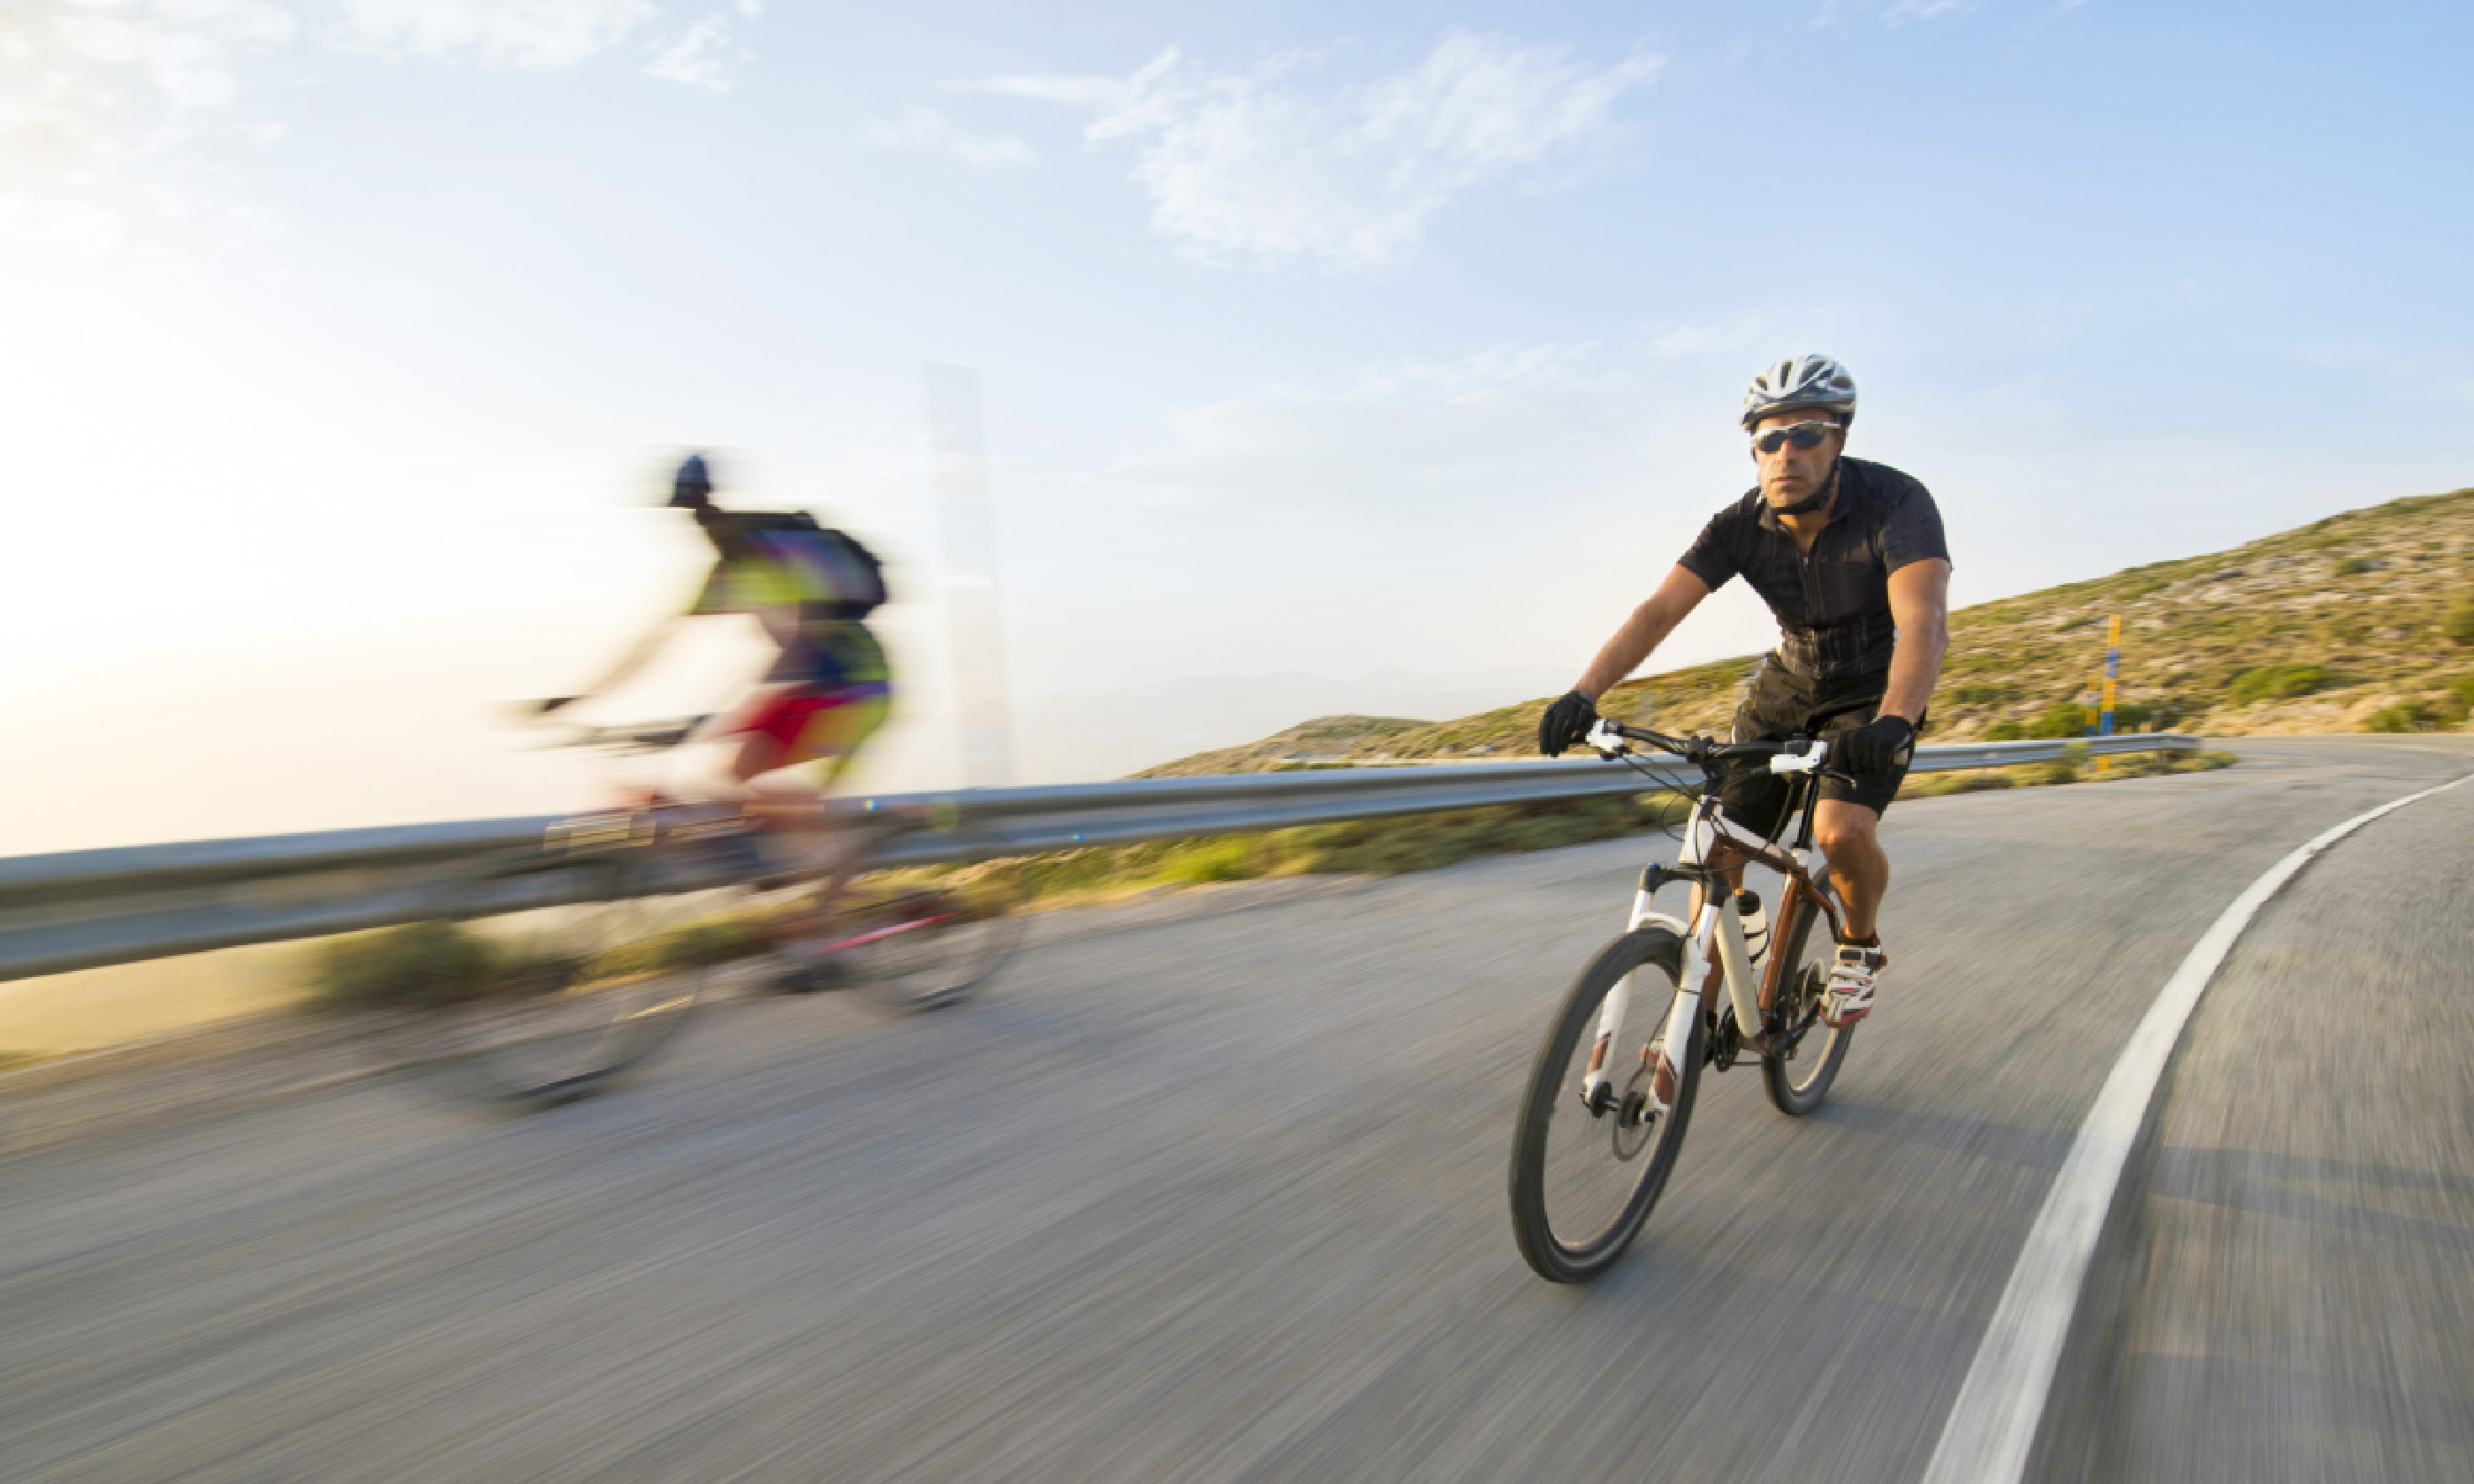 Fast cyclist on a mountain (Shutterstock)